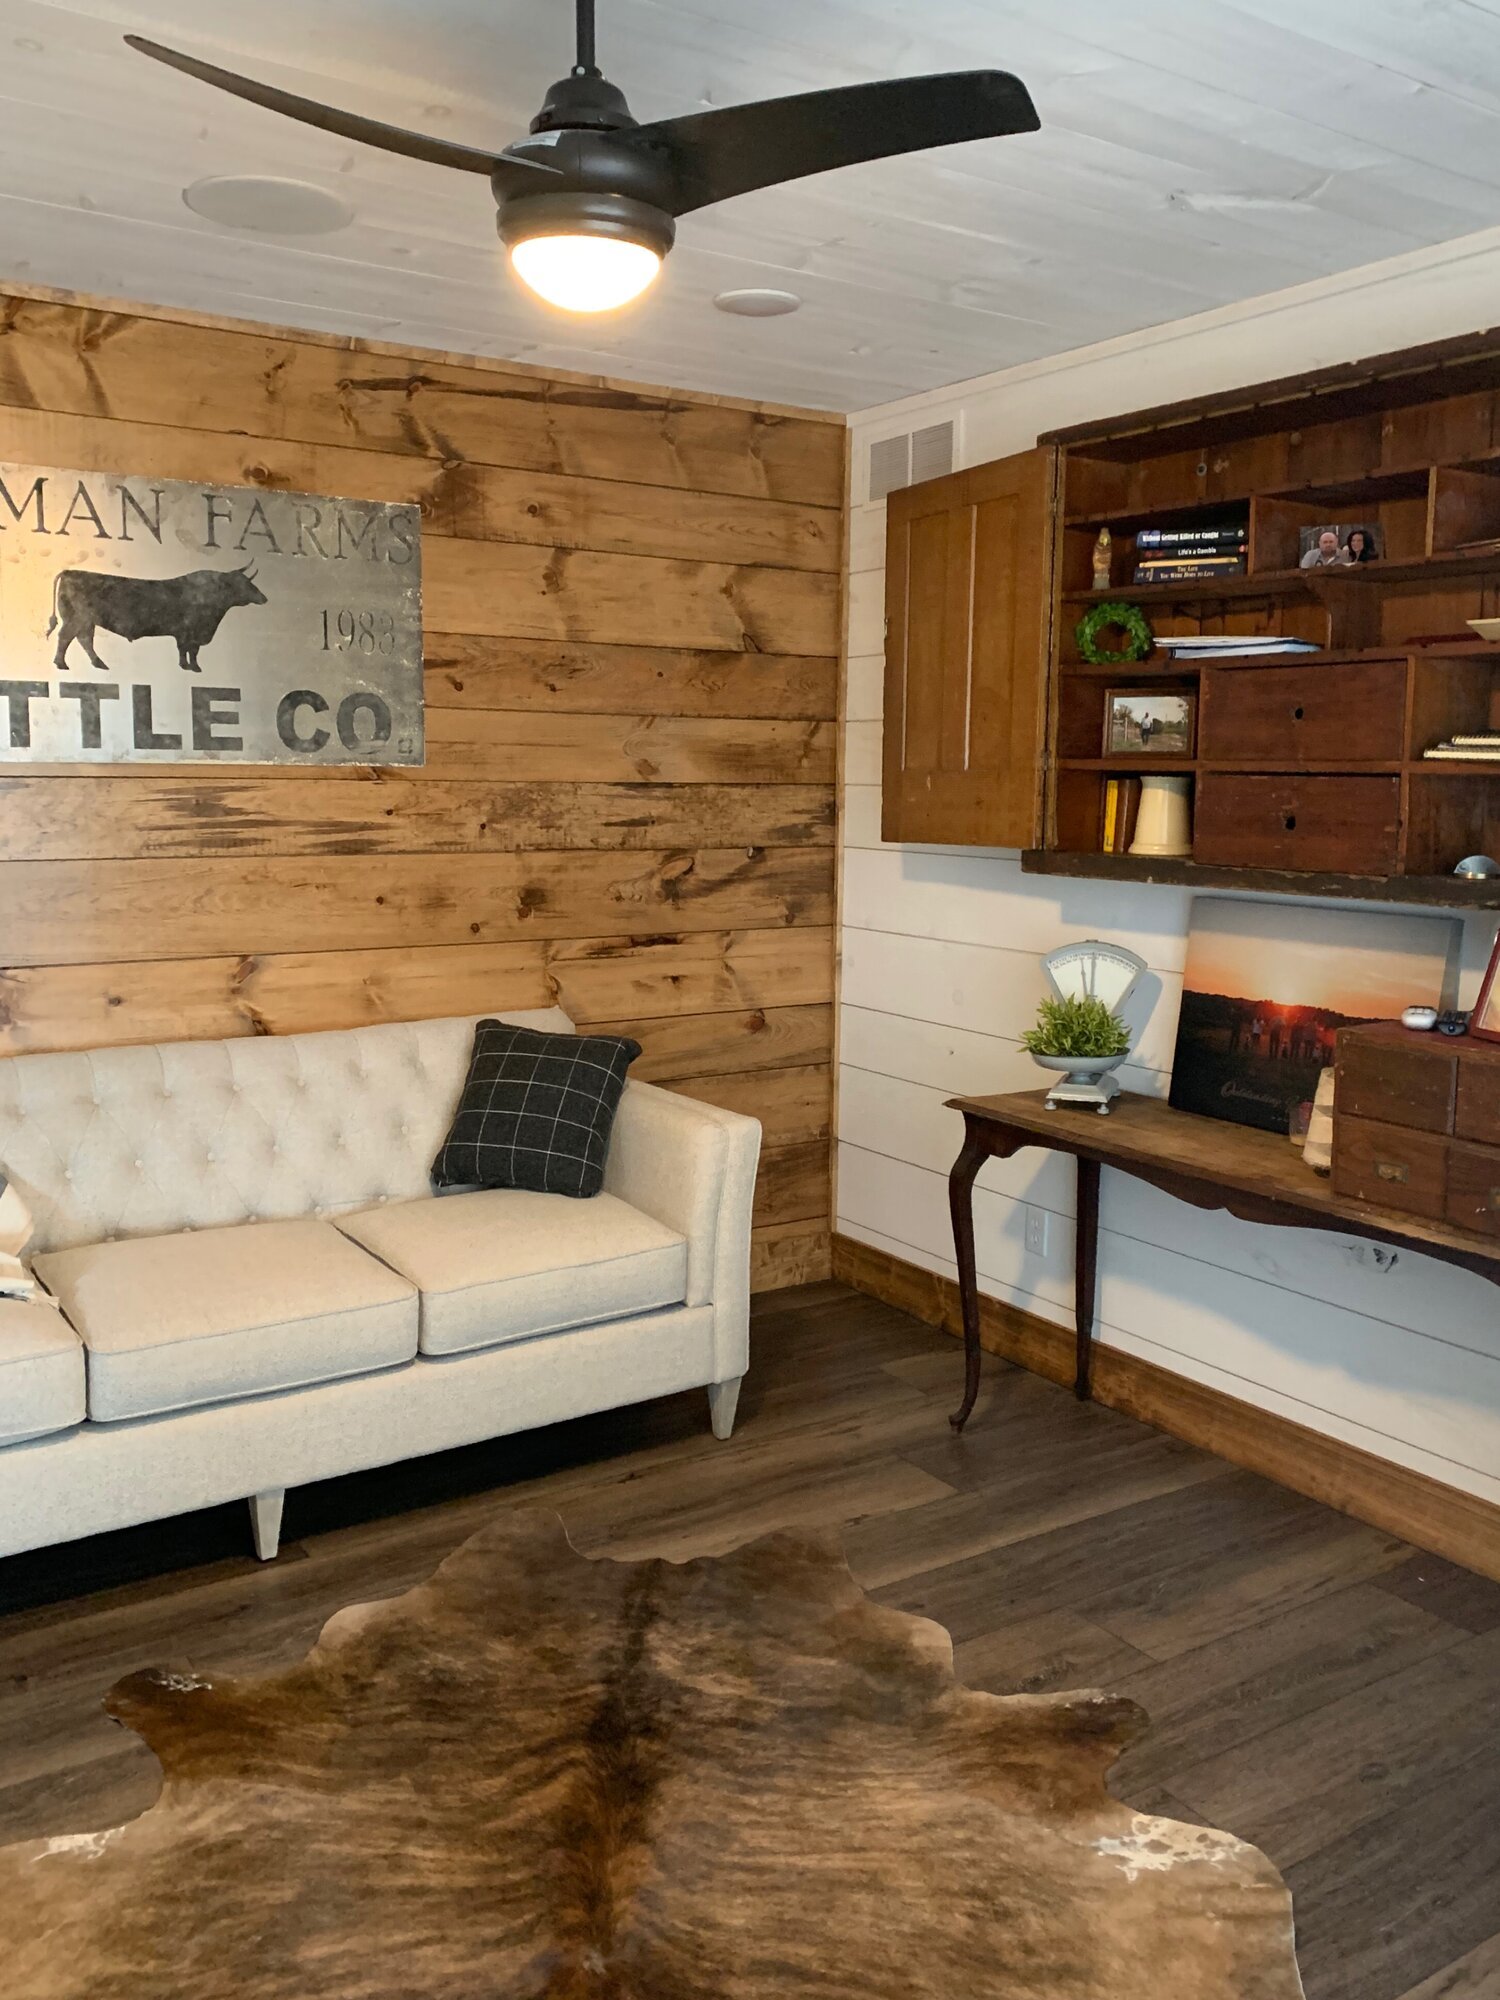  Cindy Pittman has some serious skill in interior décor! She balanced her colors wonderfully. Her predominant paint color was white, but her wood accents were several different shades of brown and they all work together perfectly! 